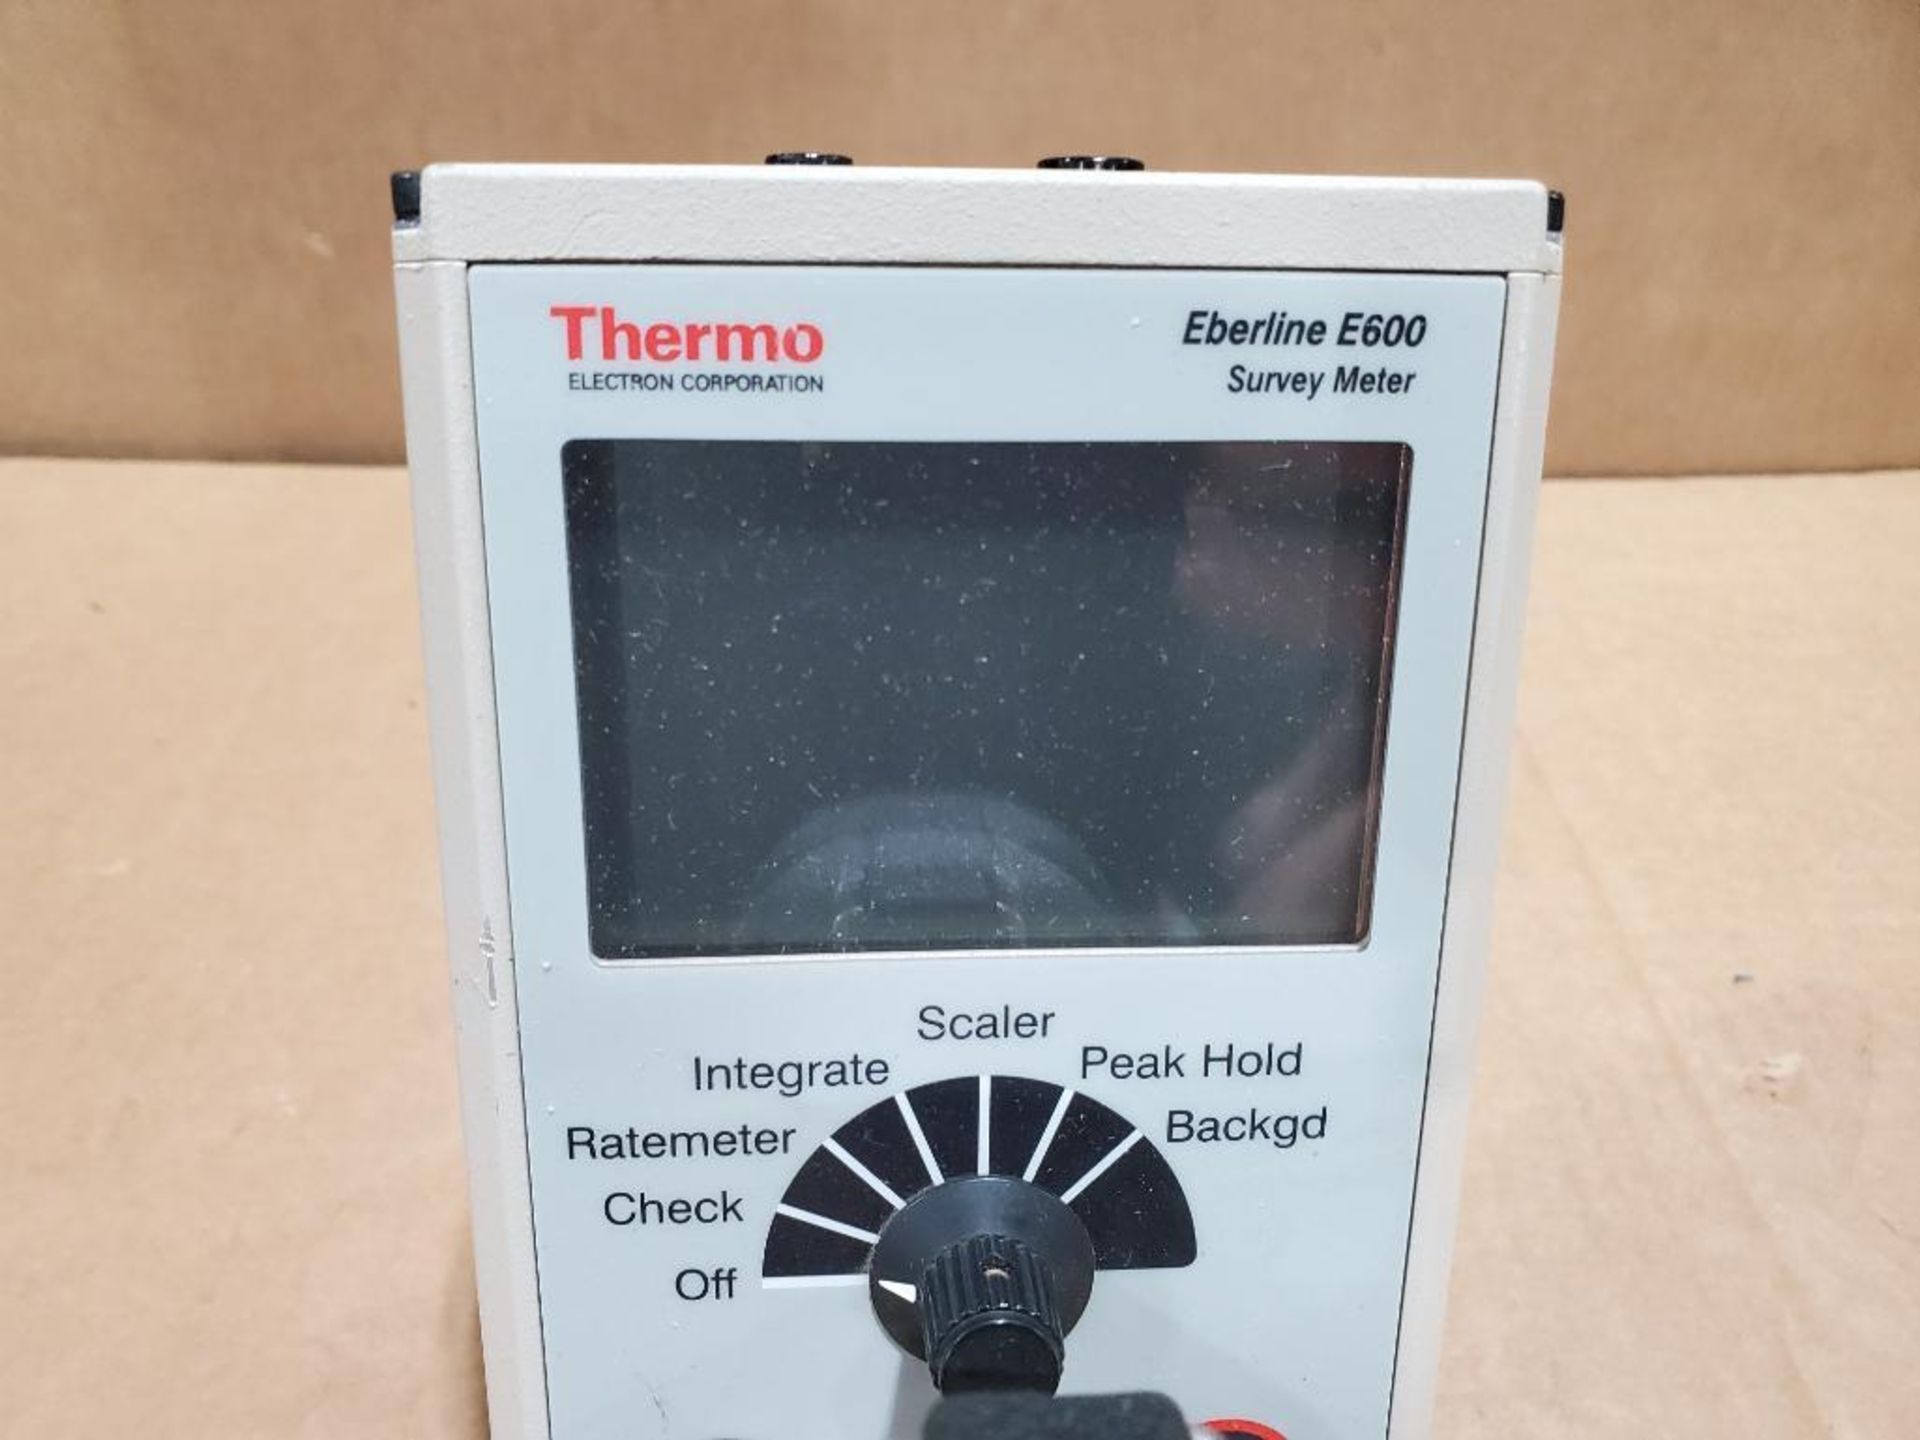 Thermo Electron Corporation geiger counter survey meter. Model Eberline E600. - Image 2 of 10